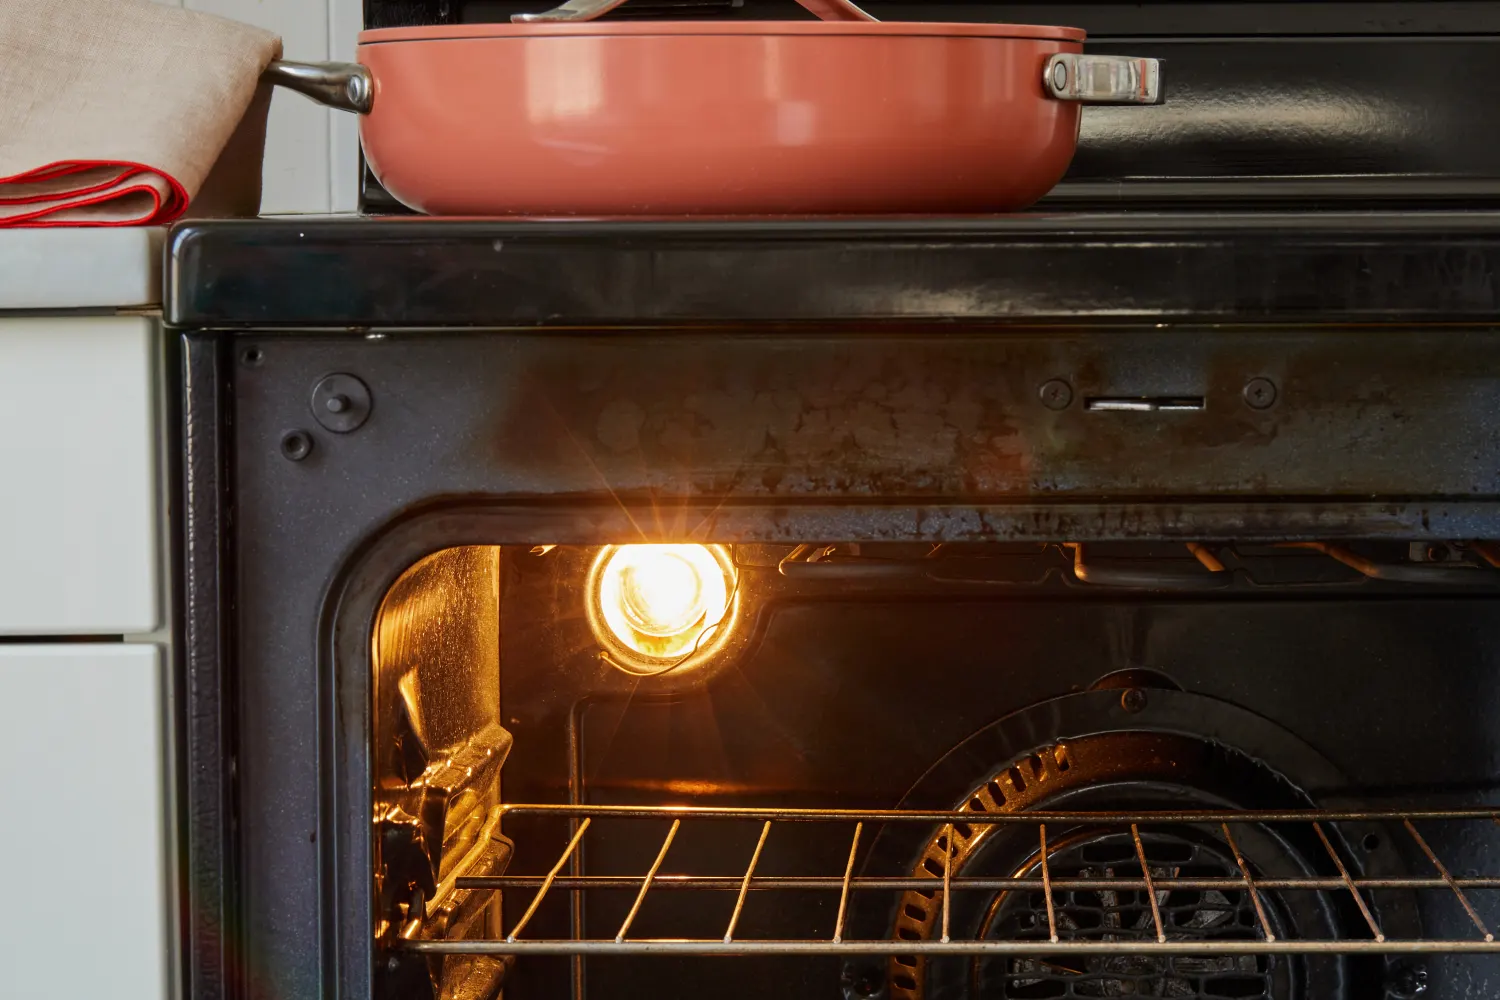 How to Remove and Replace the Light in Your Oven